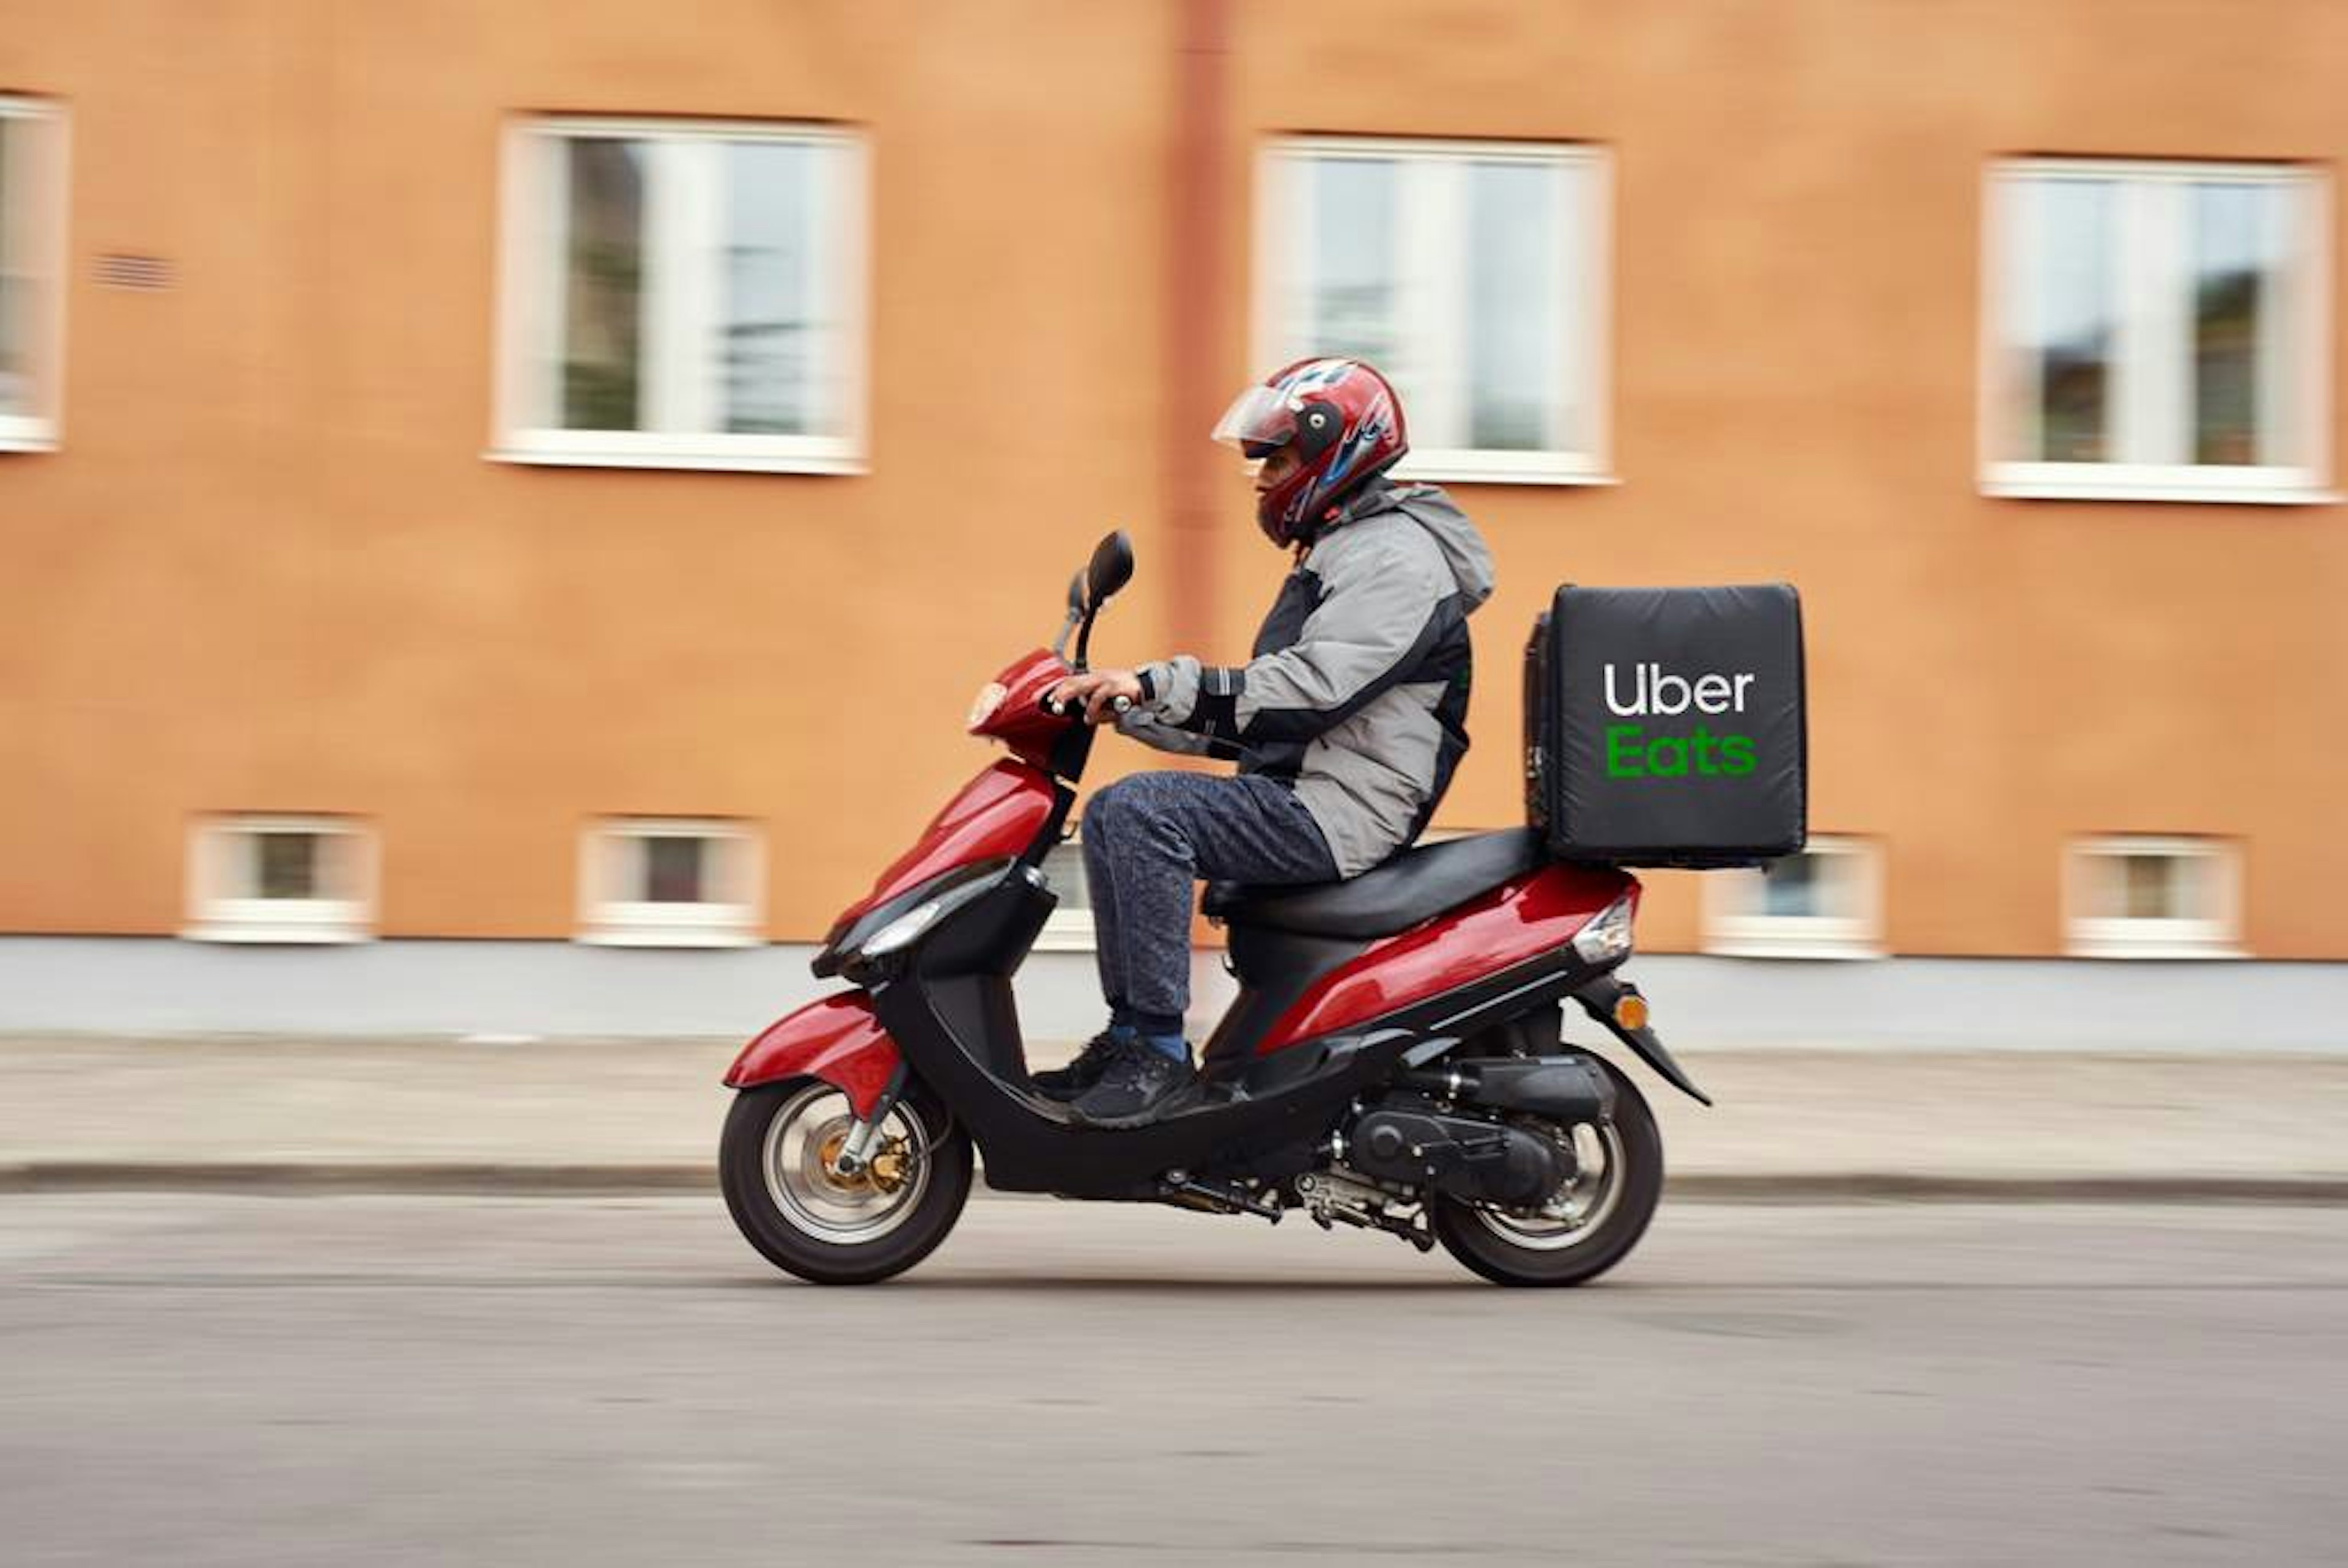 Uber Eats on X: Did you know we limit what your delivery person